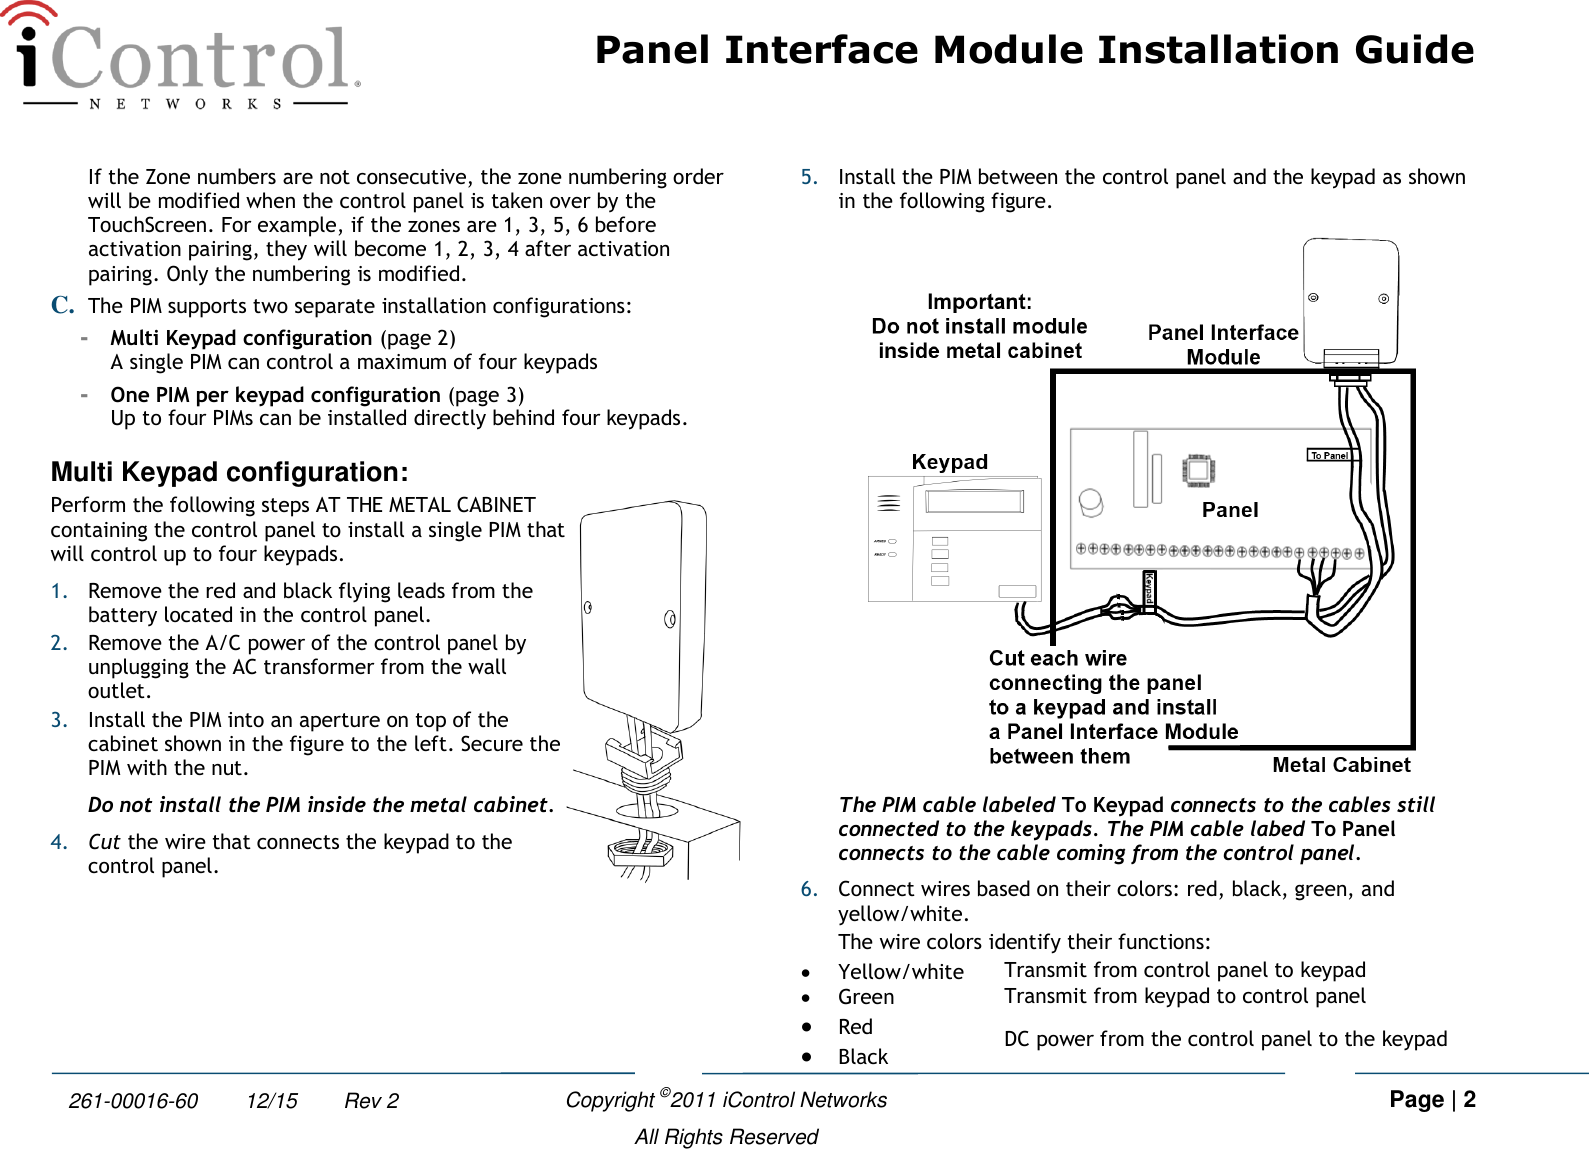 Panel Interface Module Installation Guide    Copyright ©2011 iControl Networks   Page | 2  All Rights Reserved 261-00016-60        12/15        Rev 2 If the Zone numbers are not consecutive, the zone numbering order will be modified when the control panel is taken over by the TouchScreen. For example, if the zones are 1, 3, 5, 6 before activation pairing, they will become 1, 2, 3, 4 after activation pairing. Only the numbering is modified.  C. The PIM supports two separate installation configurations: -  Multi Keypad configuration (page 2) A single PIM can control a maximum of four keypads -  One PIM per keypad configuration (page 3) Up to four PIMs can be installed directly behind four keypads.  Multi Keypad configuration: Perform the following steps AT THE METAL CABINET containing the control panel to install a single PIM that will control up to four keypads.  1. Remove the red and black flying leads from the battery located in the control panel. 2. Remove the A/C power of the control panel by unplugging the AC transformer from the wall outlet. 3. Install the PIM into an aperture on top of the cabinet shown in the figure to the left. Secure the PIM with the nut. Do not install the PIM inside the metal cabinet. 4. Cut the wire that connects the keypad to the control panel.  5. Install the PIM between the control panel and the keypad as shown in the following figure.  The PIM cable labeled To Keypad connects to the cables still connected to the keypads. The PIM cable labed To Panel connects to the cable coming from the control panel. 6. Connect wires based on their colors: red, black, green, and yellow/white. The wire colors identify their functions:  Yellow/white Transmit from control panel to keypad  Green Transmit from keypad to control panel  Red DC power from the control panel to the keypad  Black 